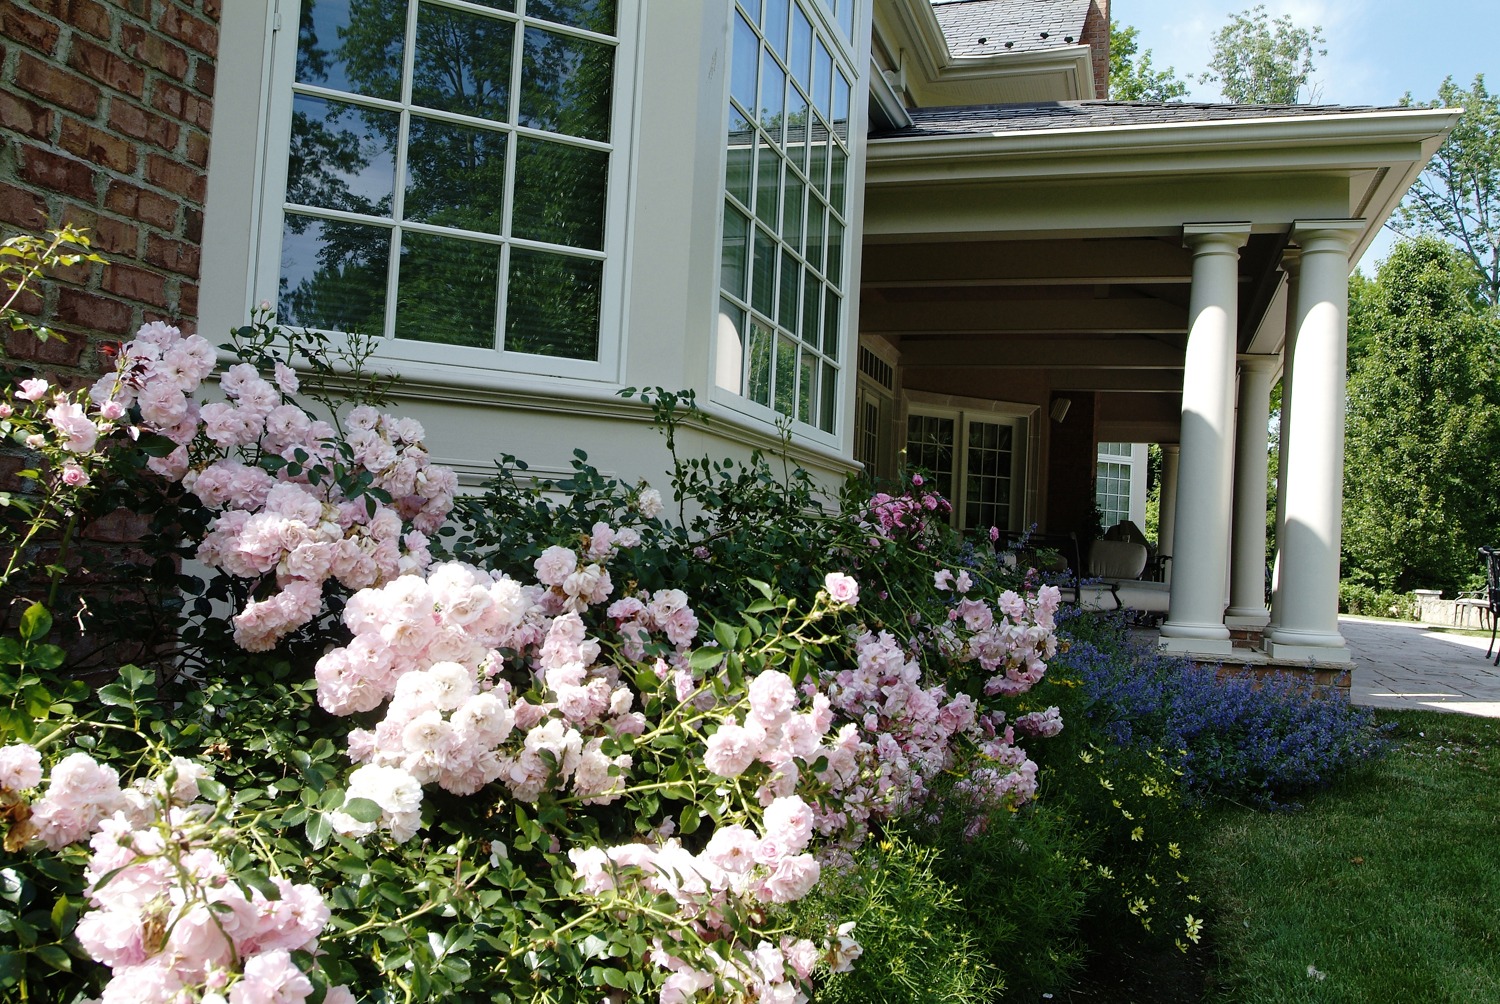 A classic house with large pillars, a brick facade, and a porch surrounded by lush pink roses and greenery under a clear blue sky.